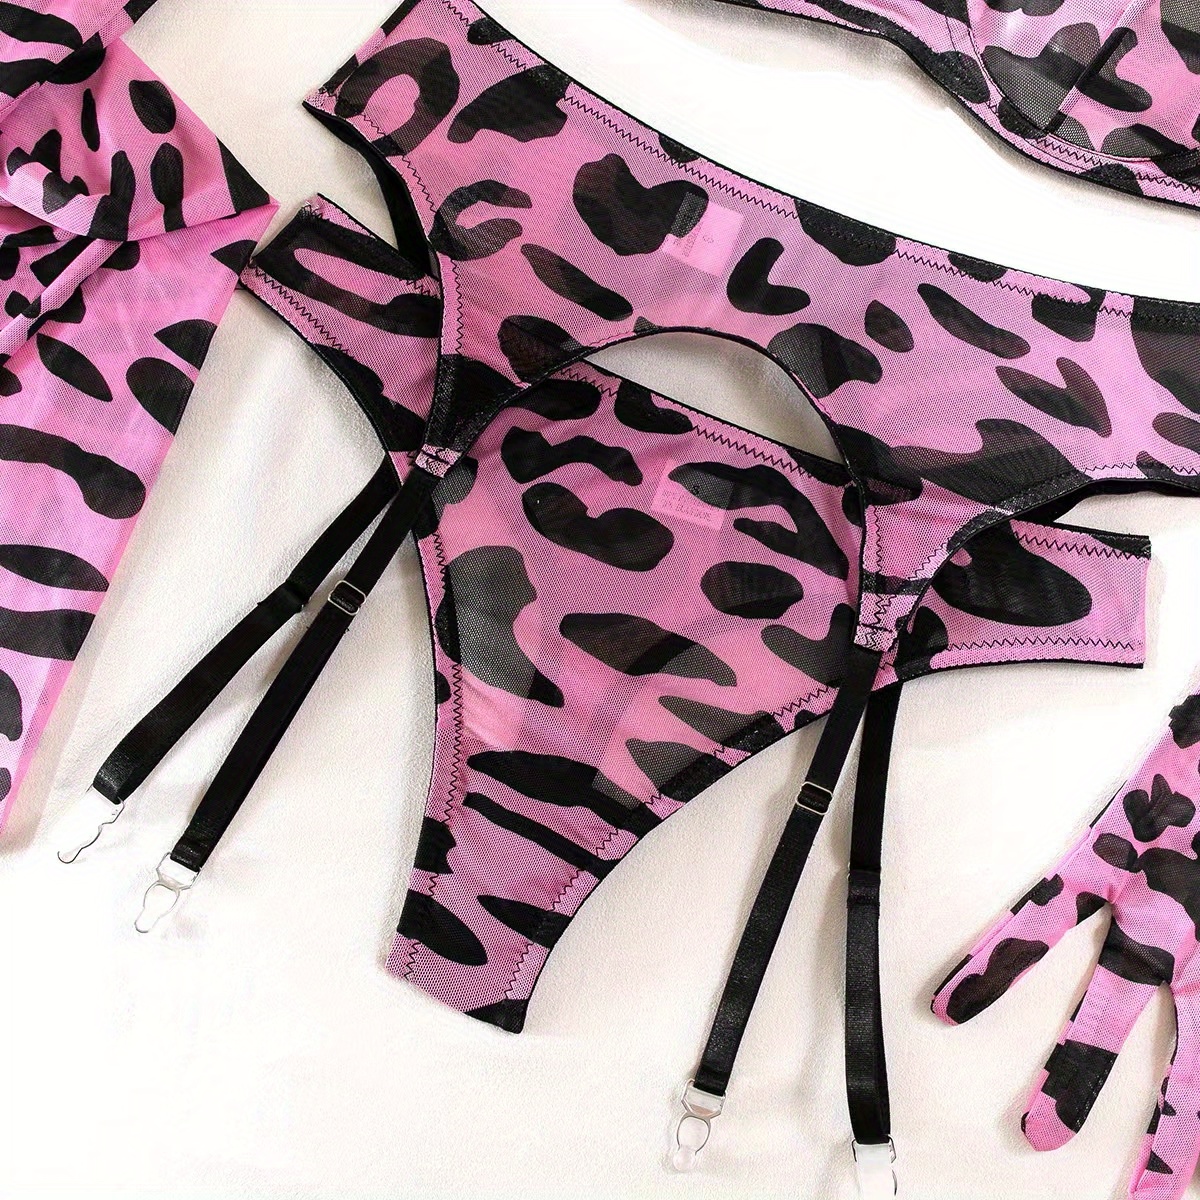 Pink Leopard Print Cut-Out Lingerie With Stocking – Free From Label